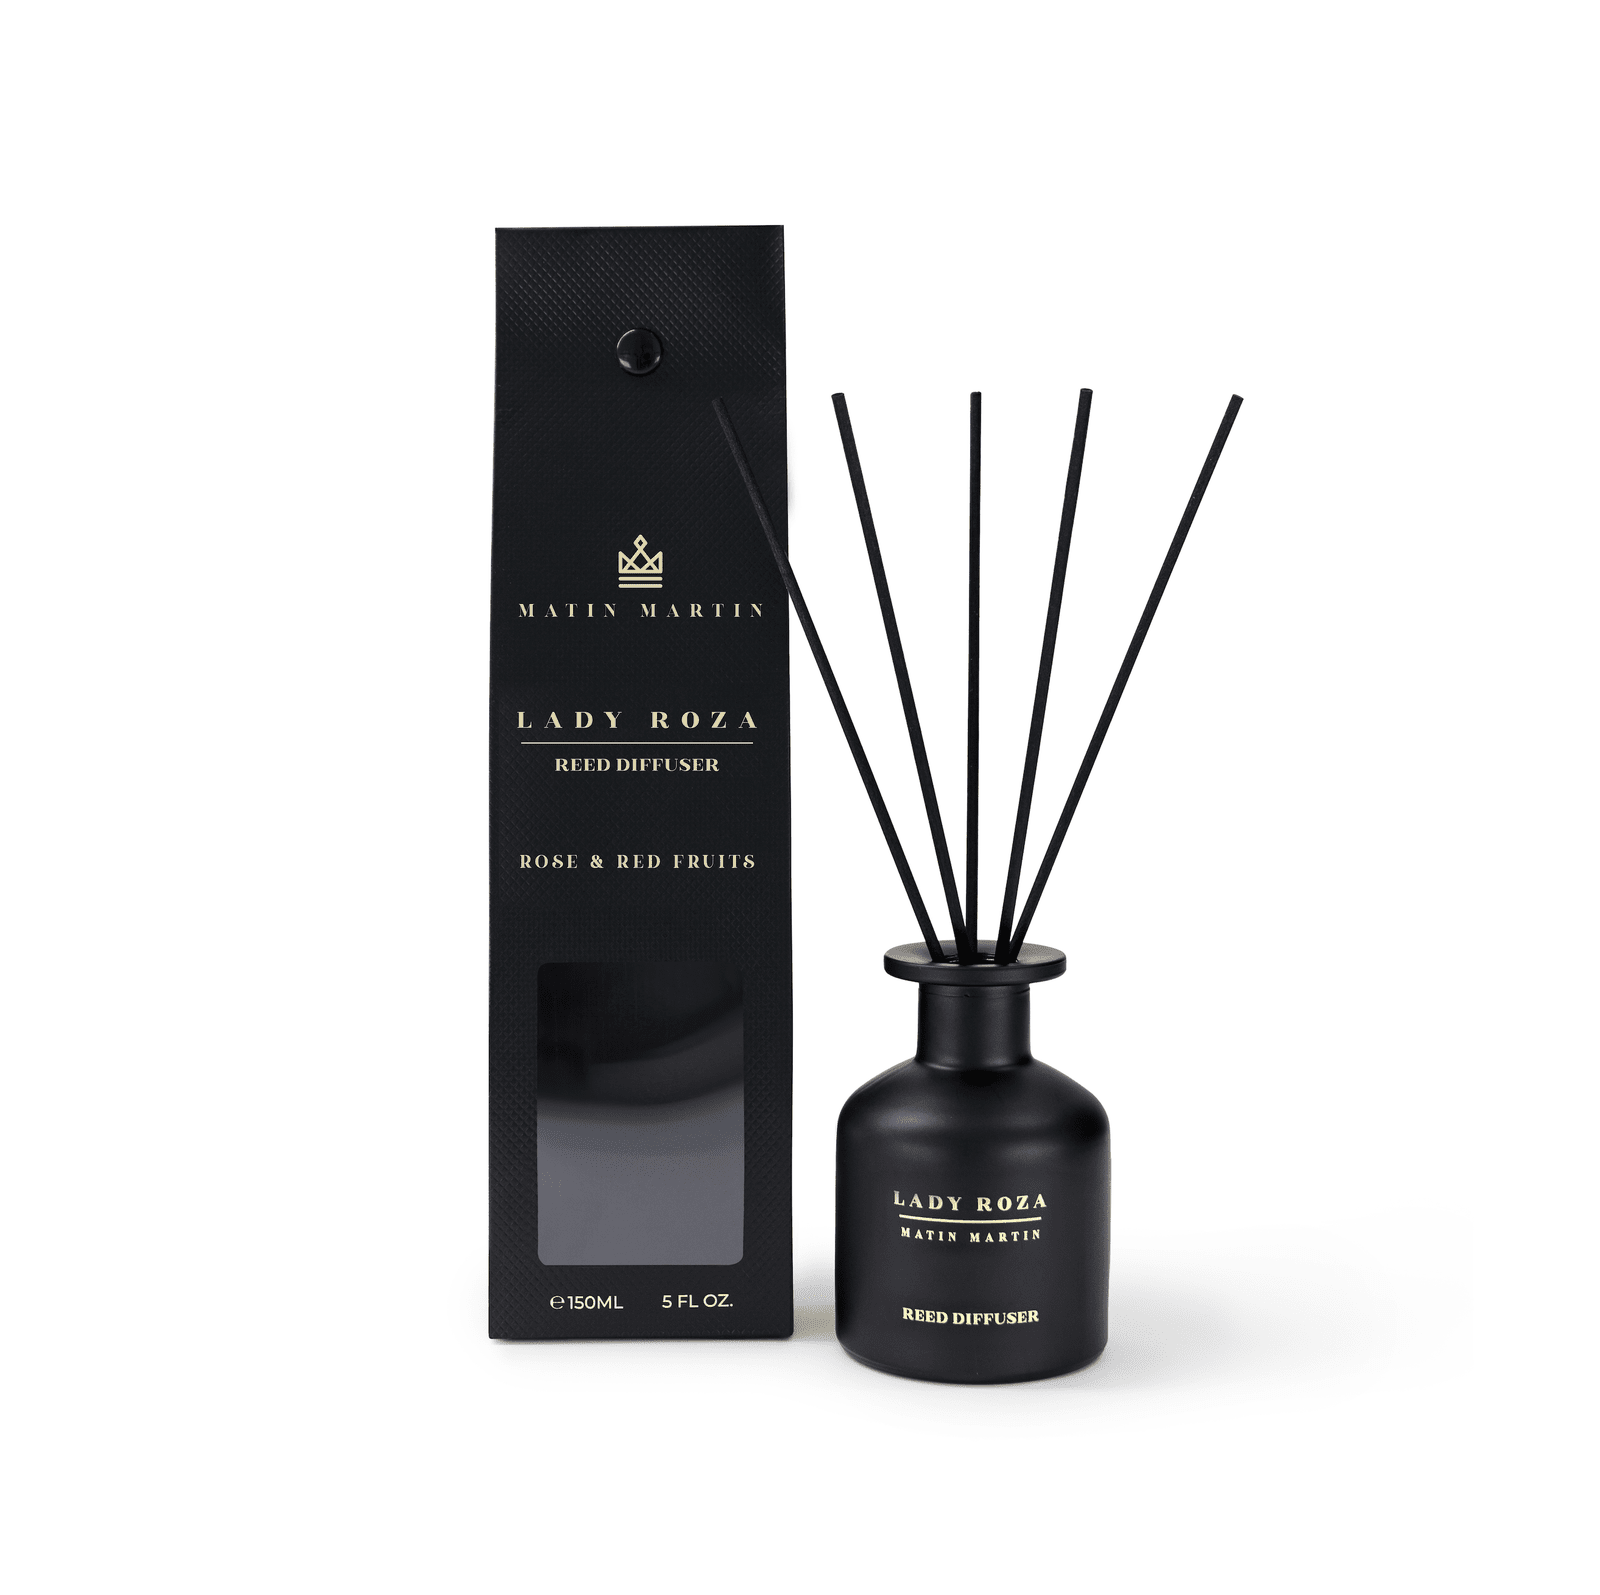 LADY ROZA - Reed Diffuser 150ml By Matin Martin